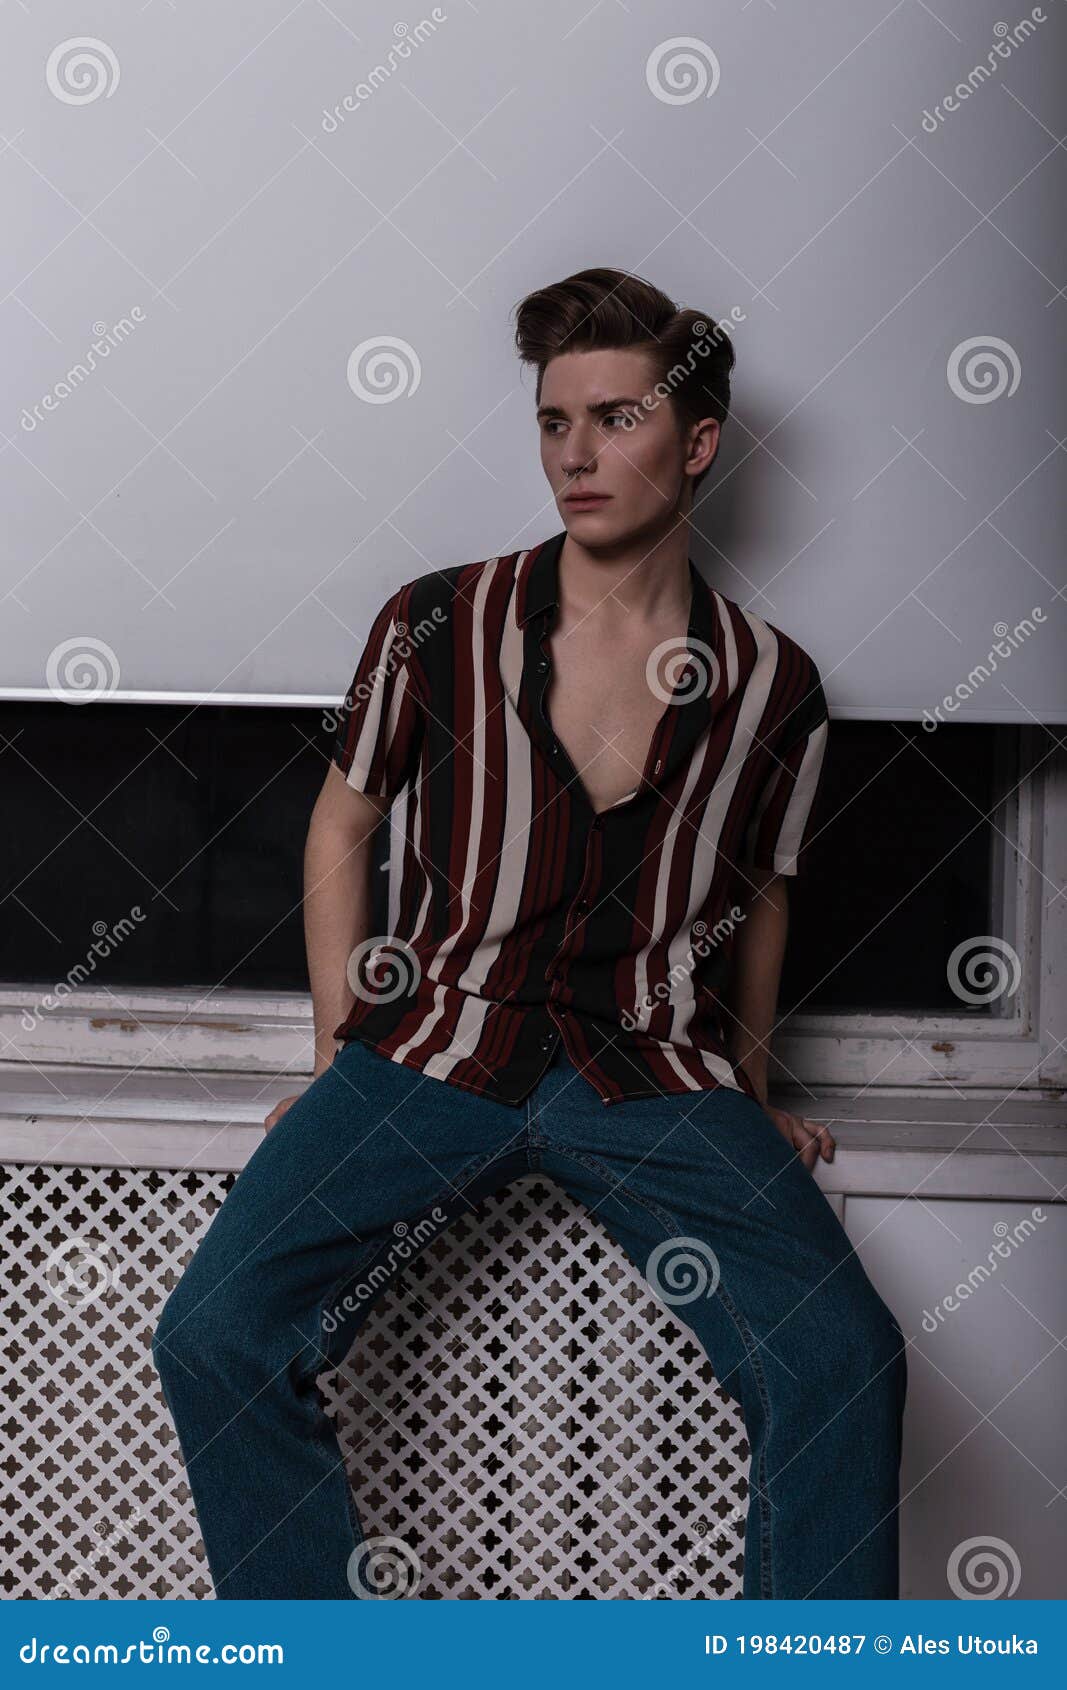 Modern Fashion Model of Fashionable Young Man with Stylish Hairstyle in  Trendy Clothes in Retro Style Posing Near a White Window Stock Image -  Image of piercing, attractive: 198420487